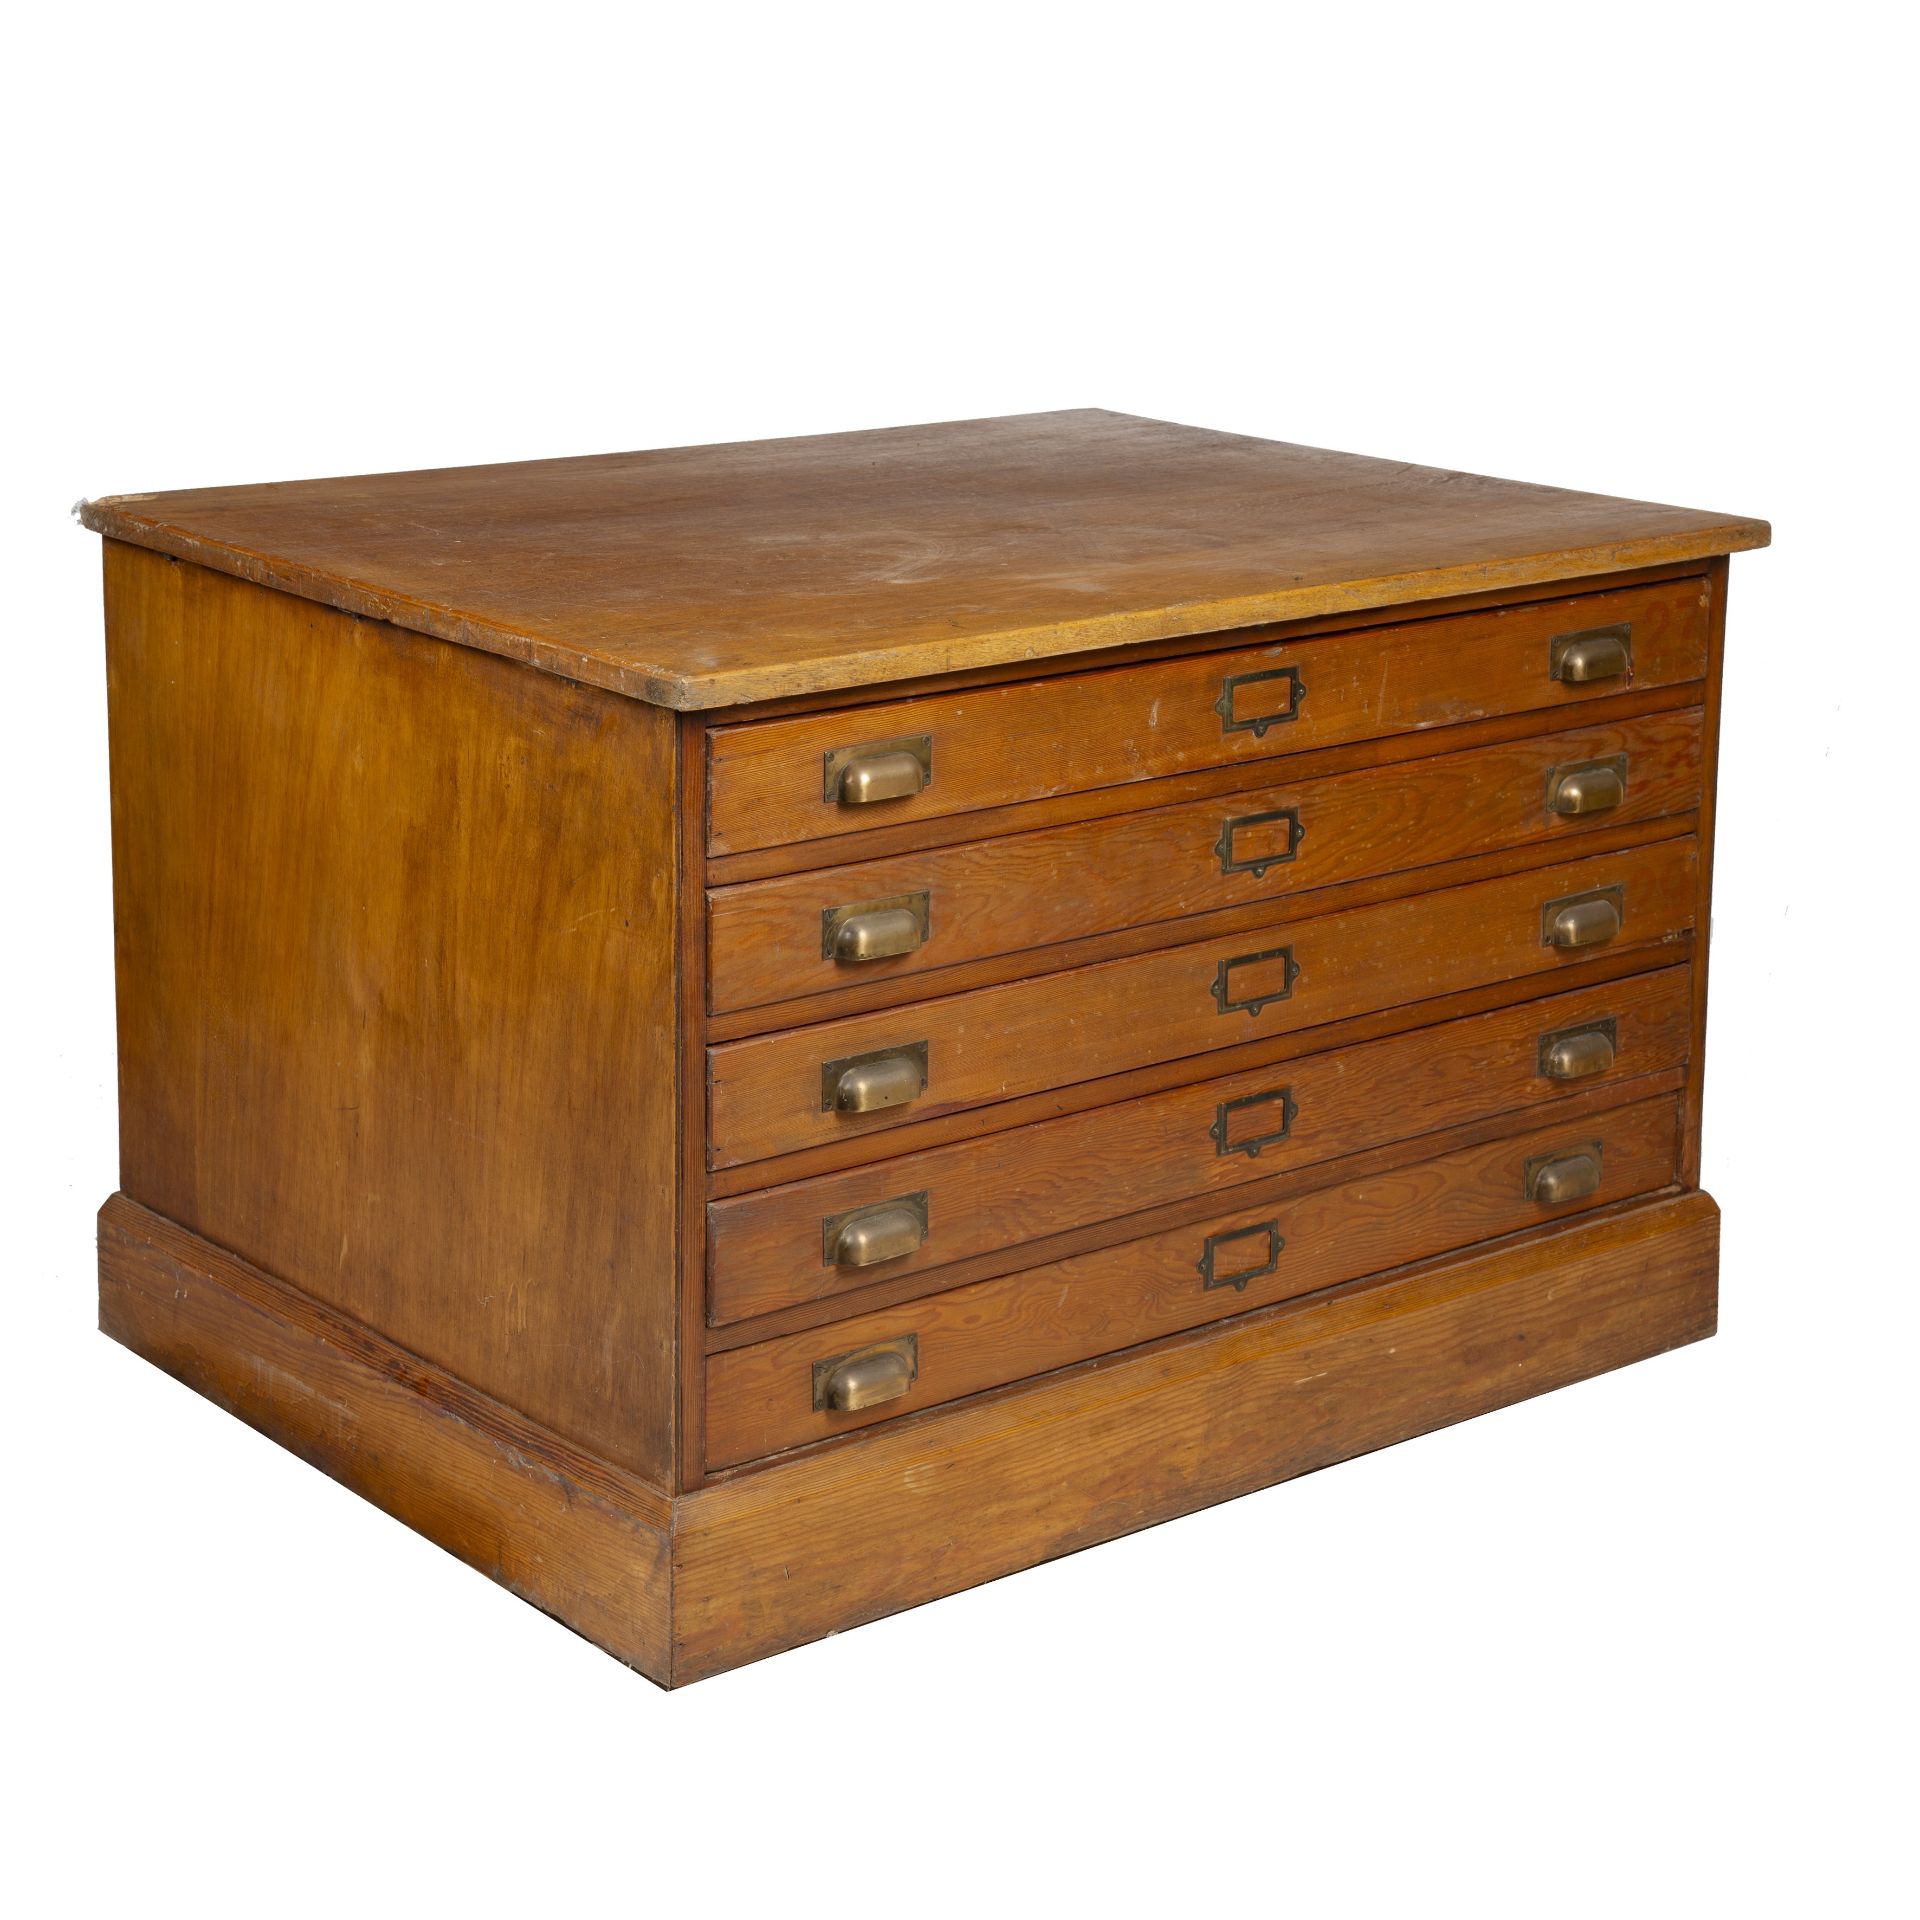 An early 20th century oak and pine five drawer plan chest, with cup handles and a plinth base, 120cm